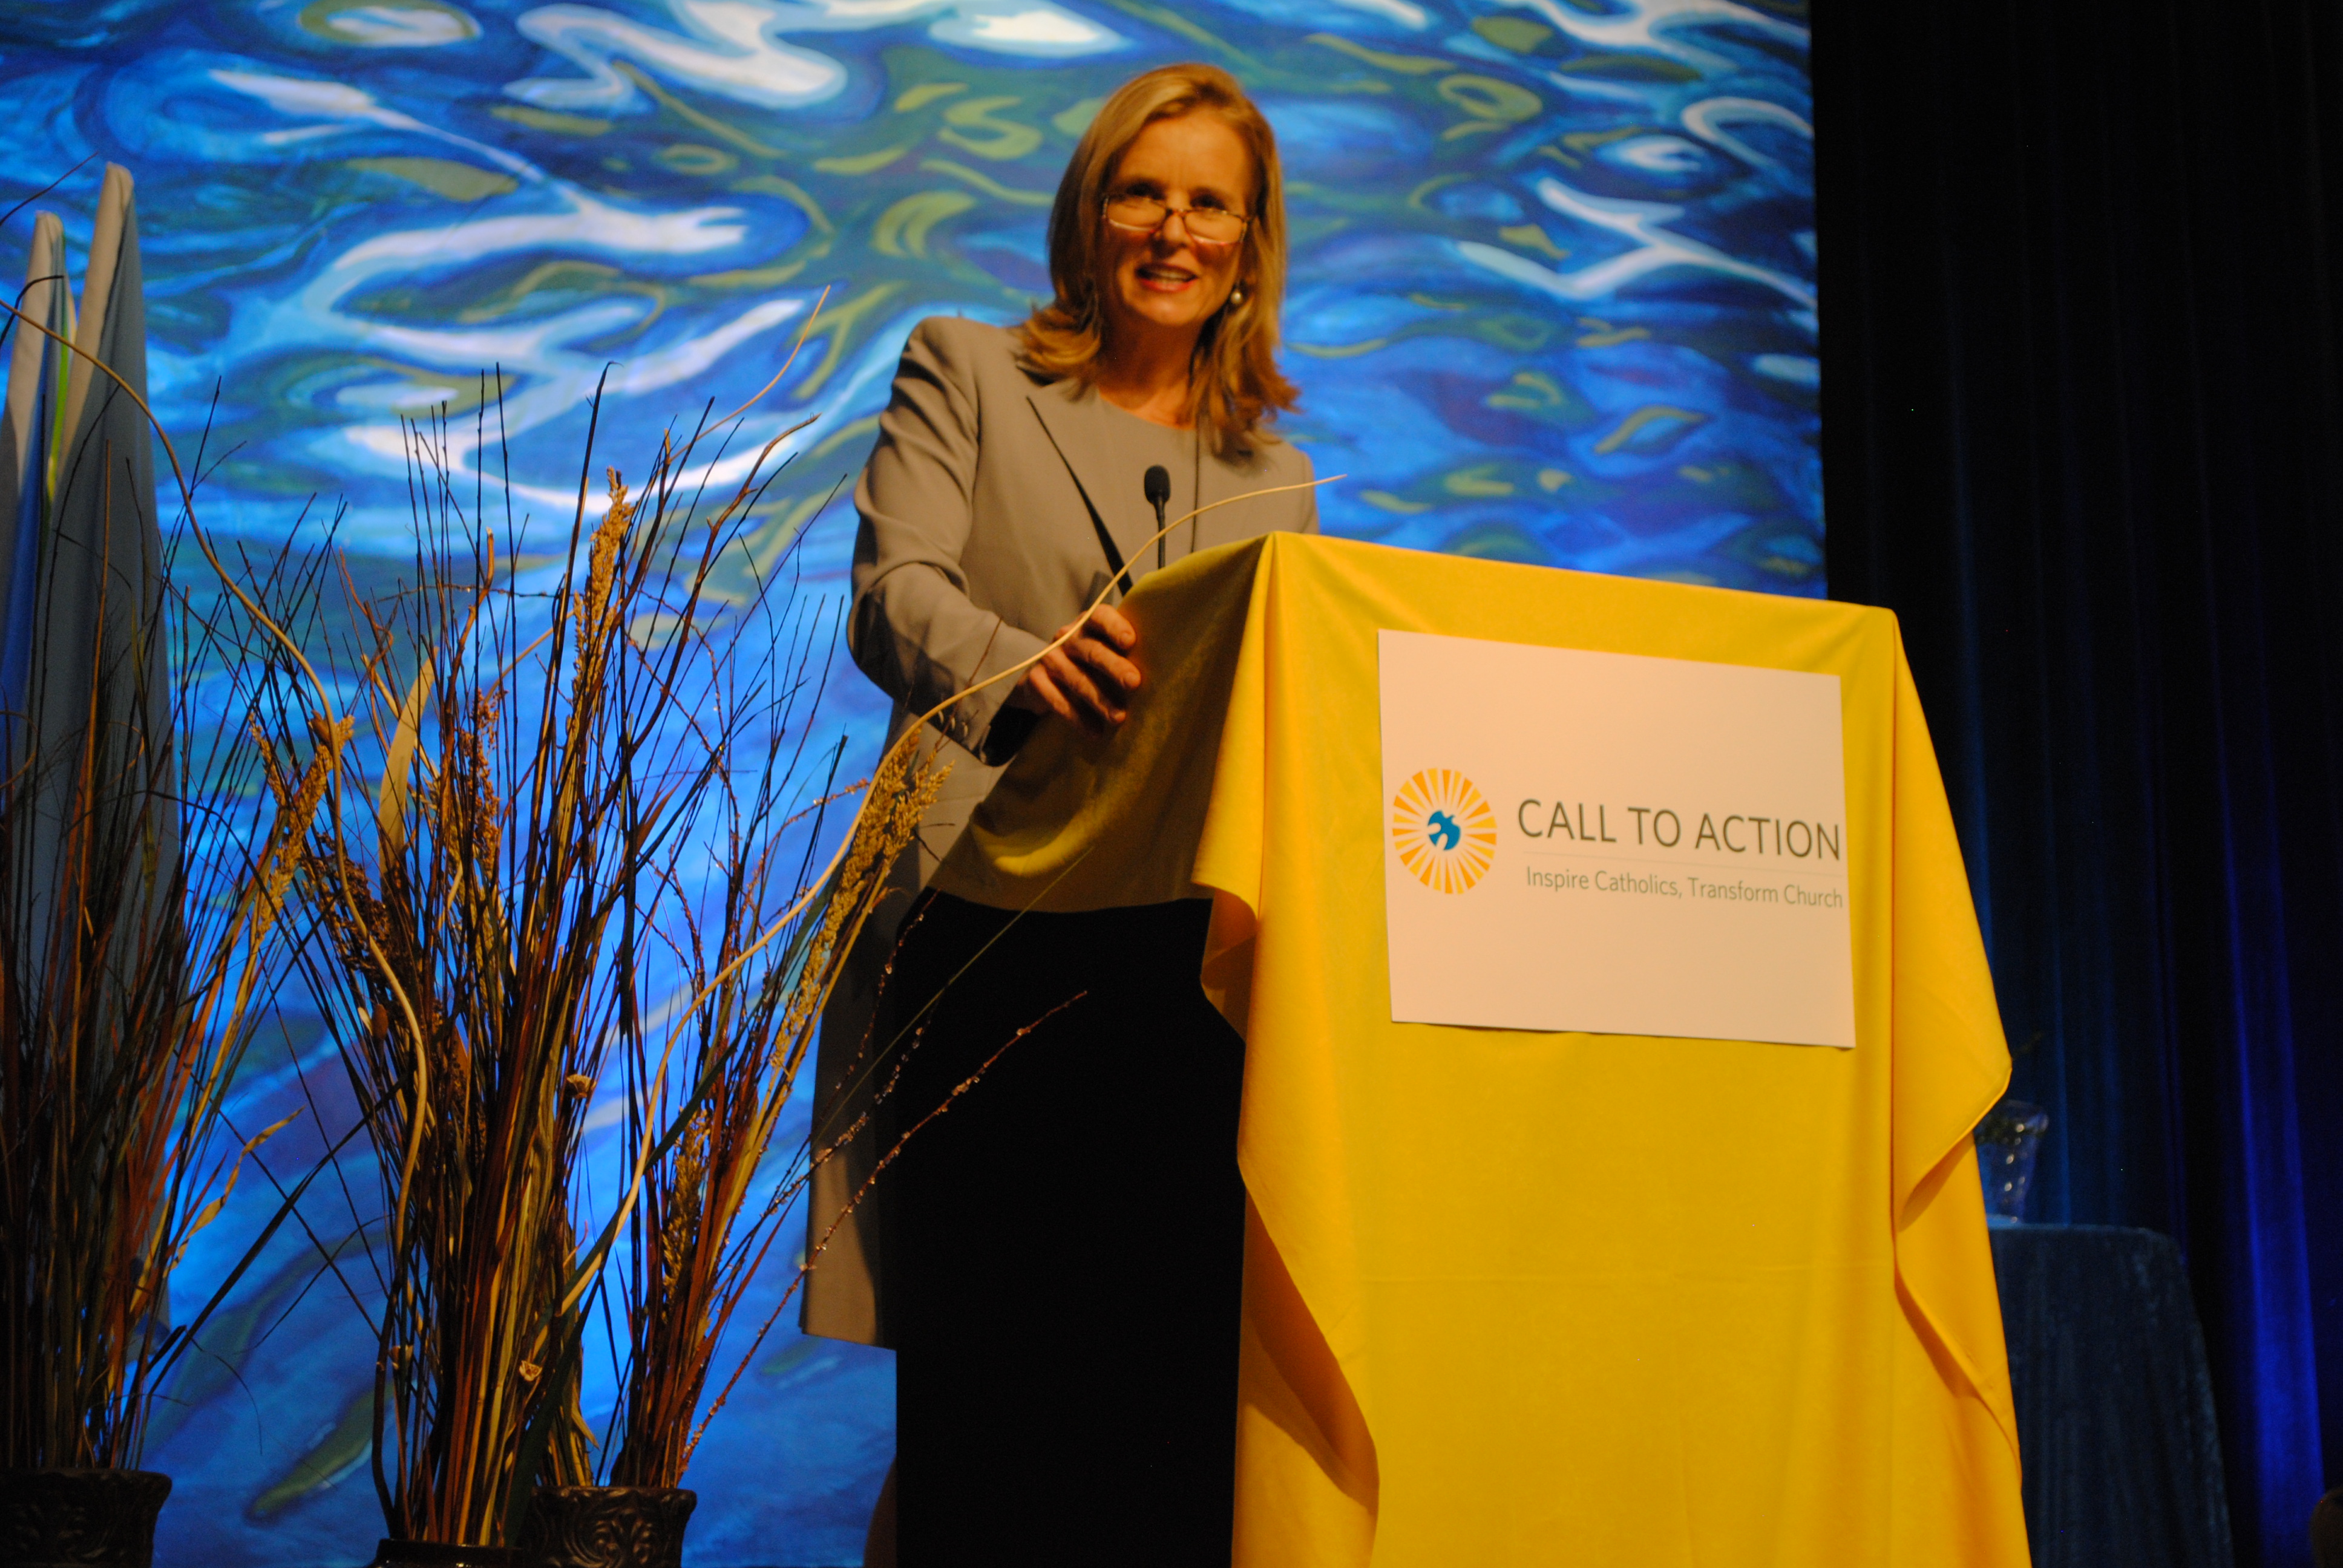 Kerry Kennedy gives the first keynote address at the 2014 Call To Action Conference in Memphis. (NCR photo/Mick Forgey)